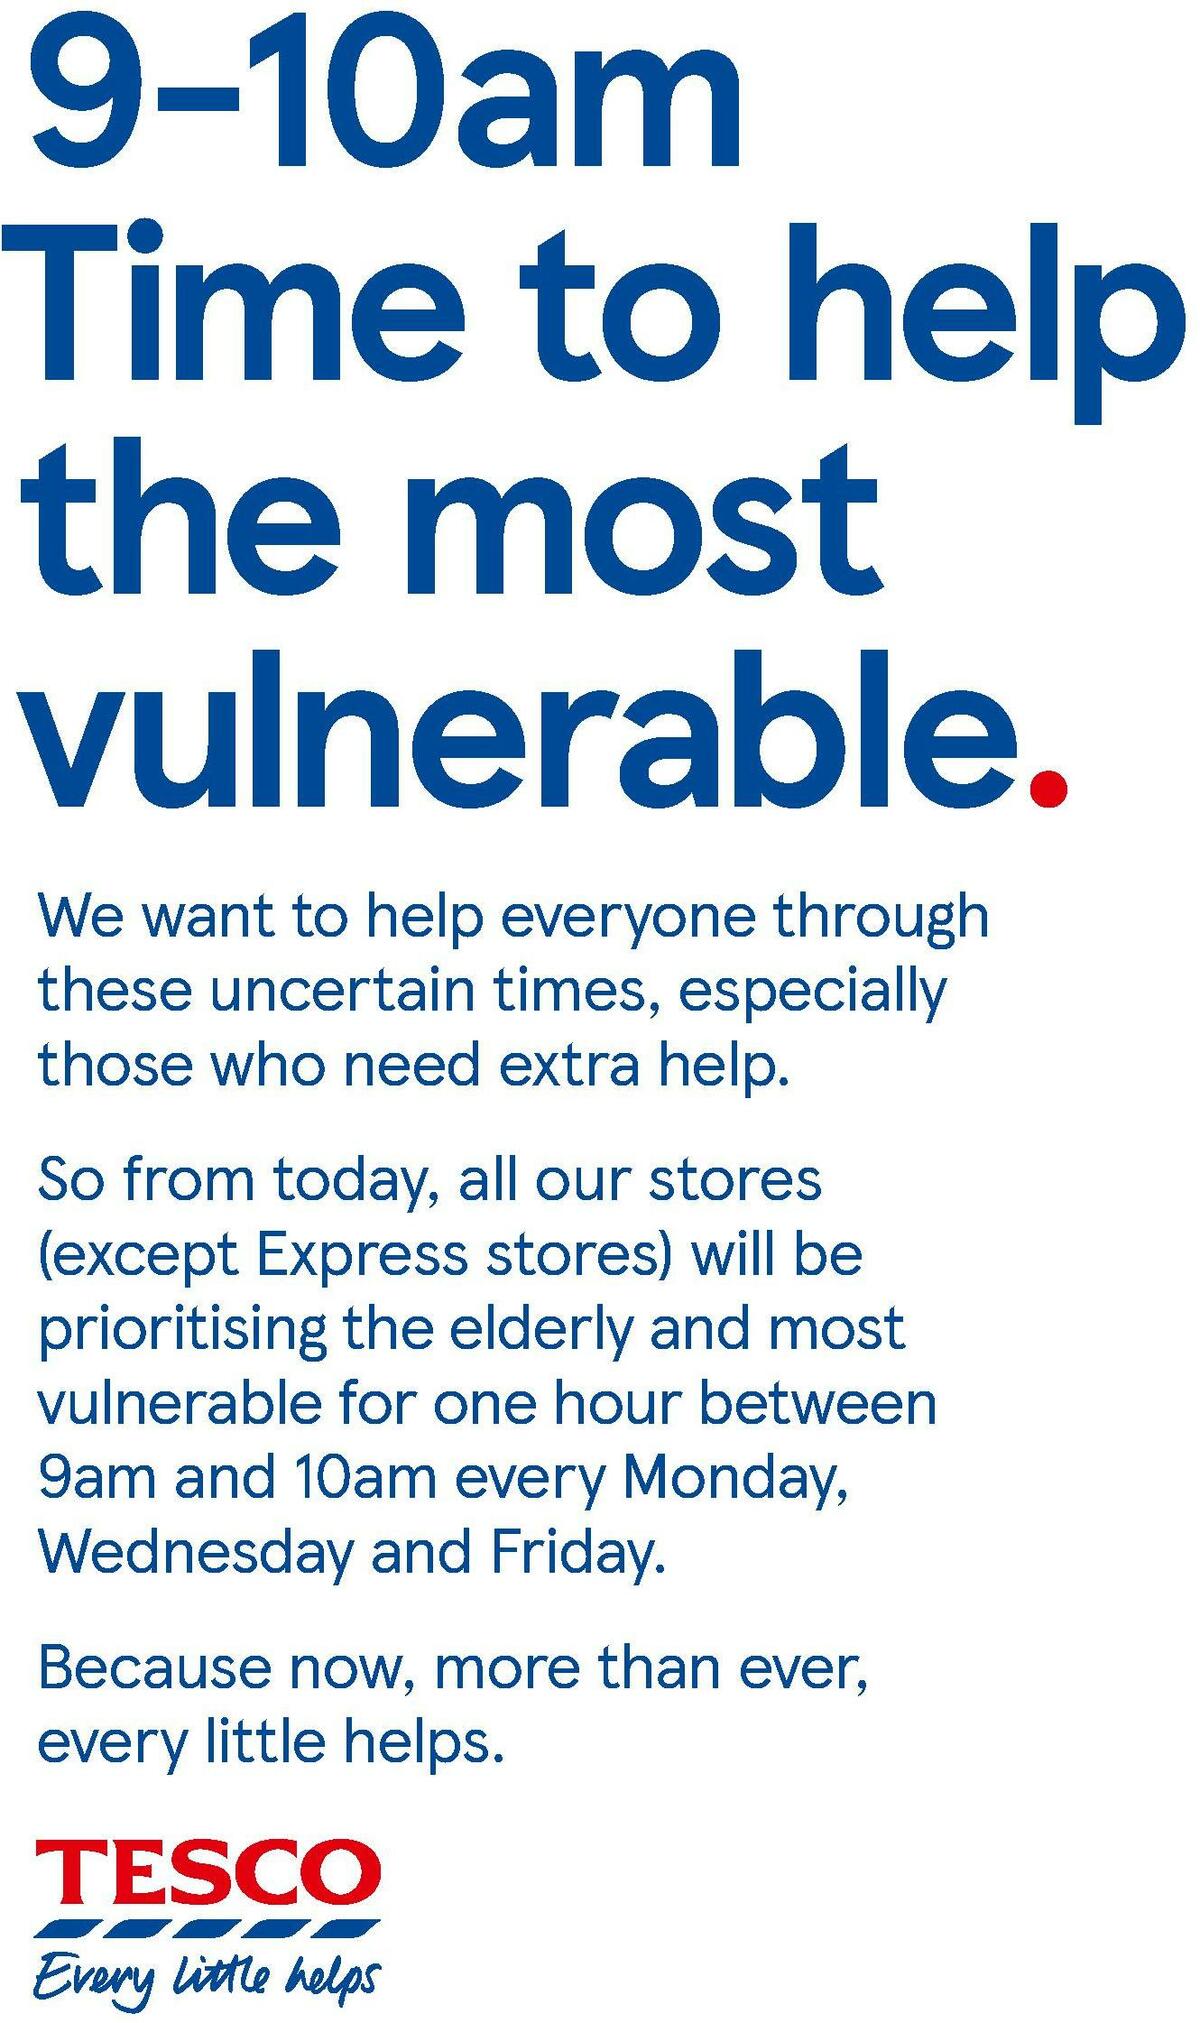 TESCO Time to help the most vulnerable Offers from 24 March